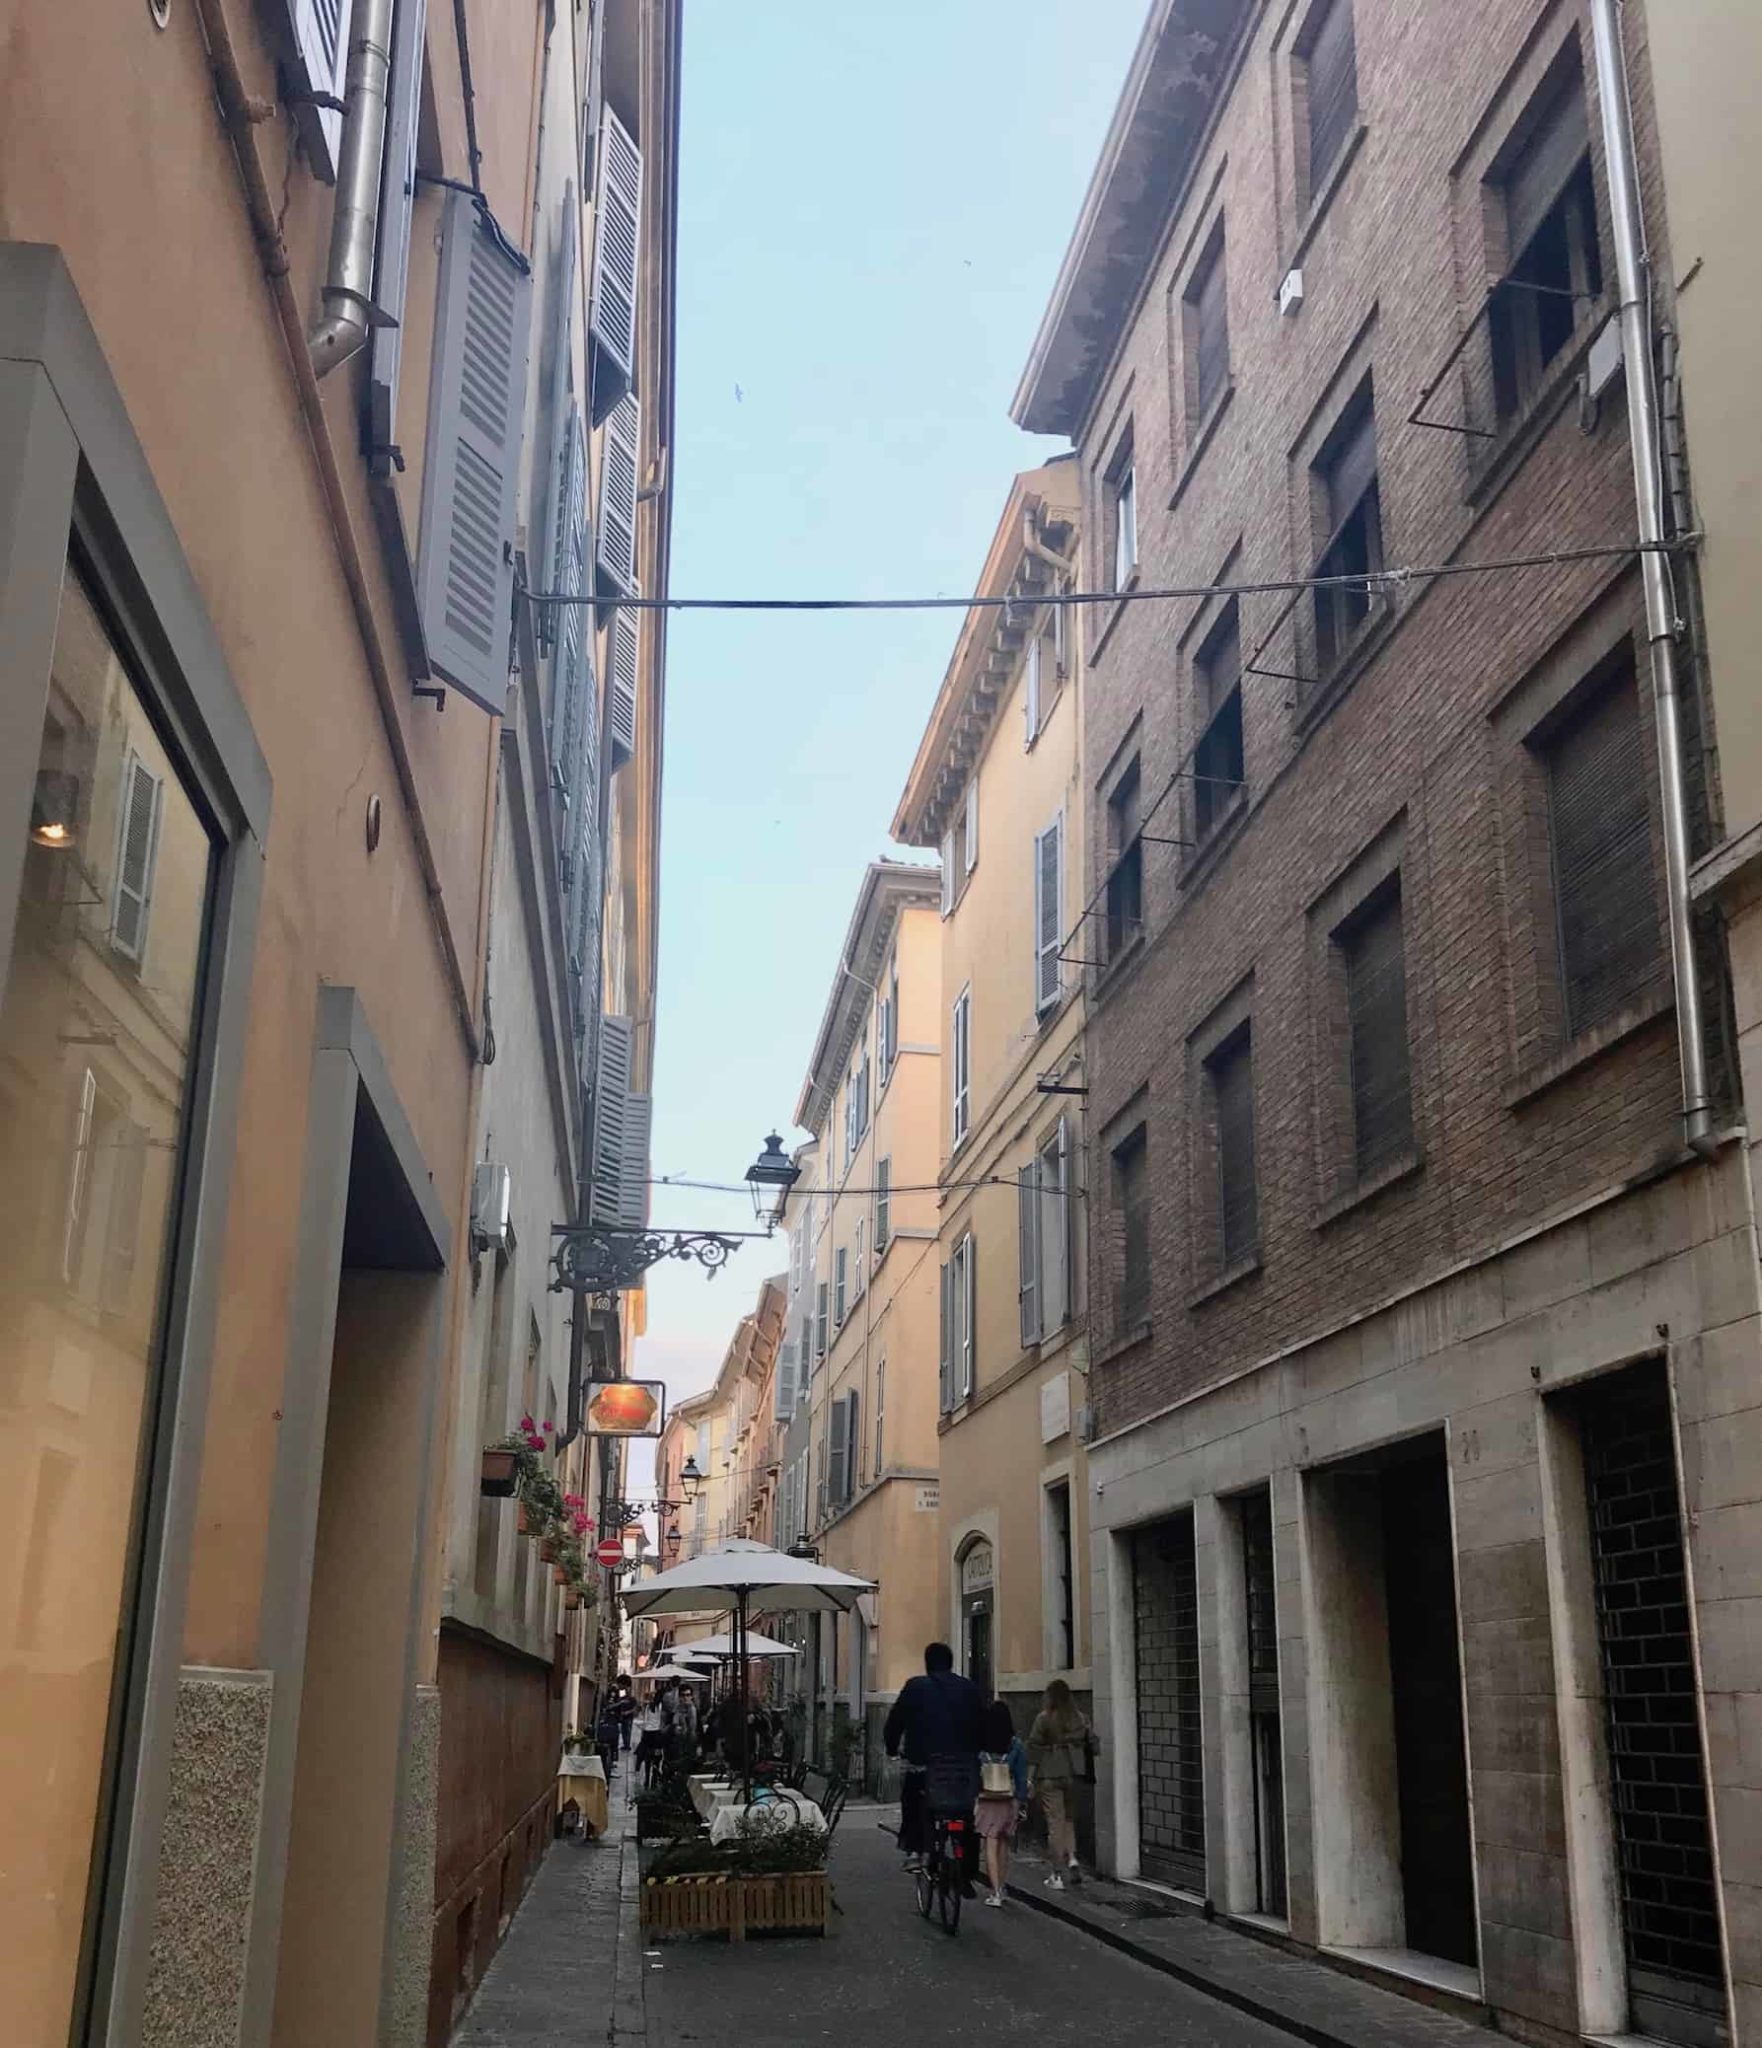 A street in the city of Parma